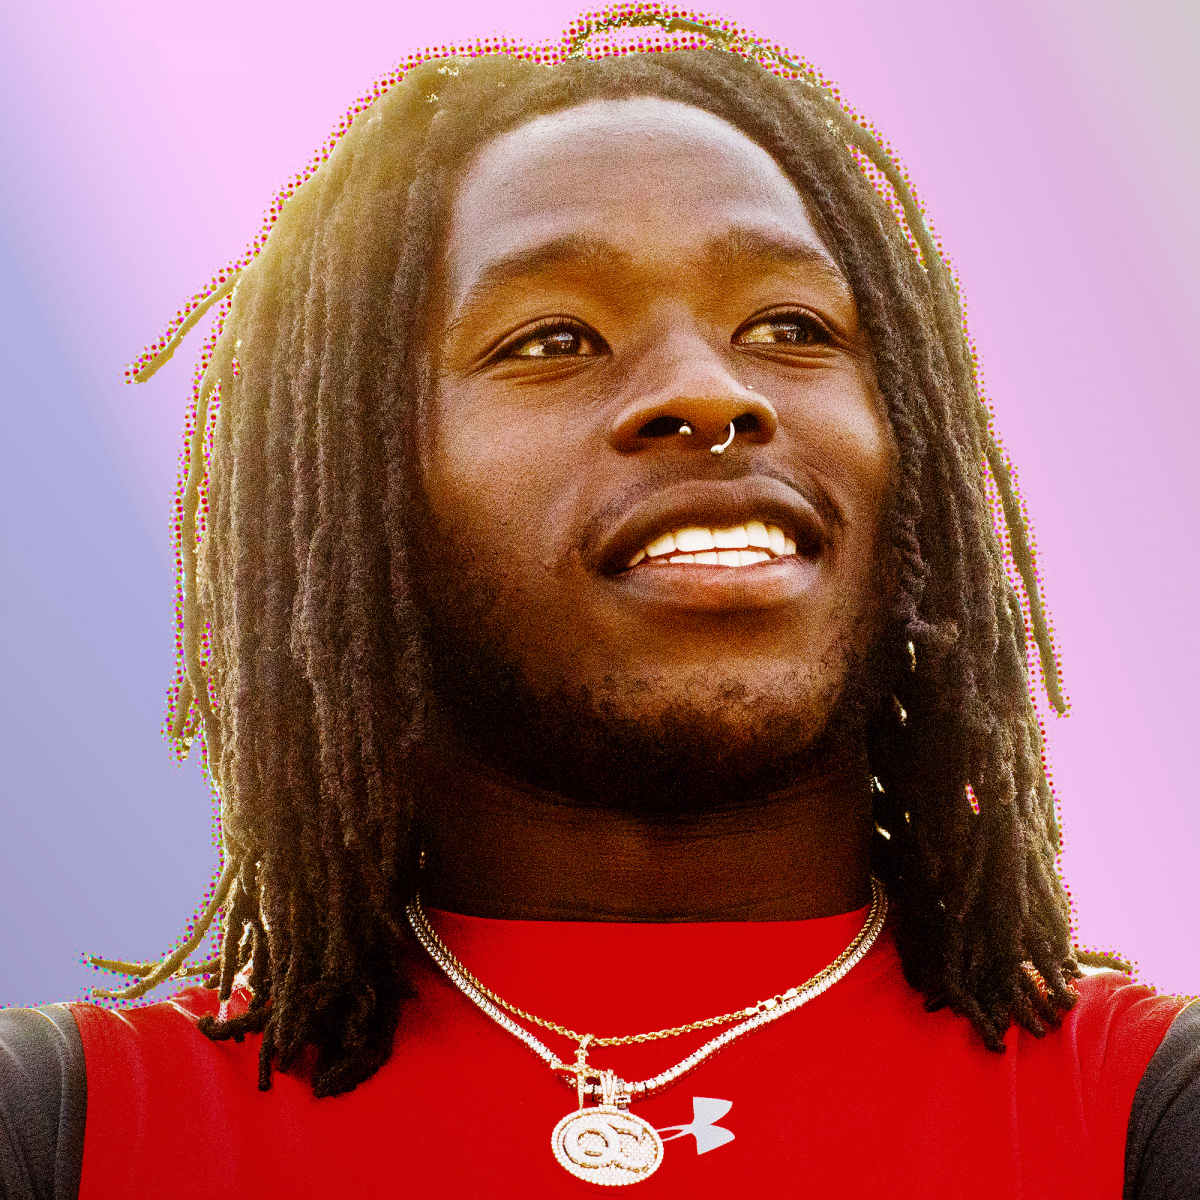 Chasing Alvin Kamara The Nfl S Reluctant Star Bleacher Report Latest News Videos And Highlights